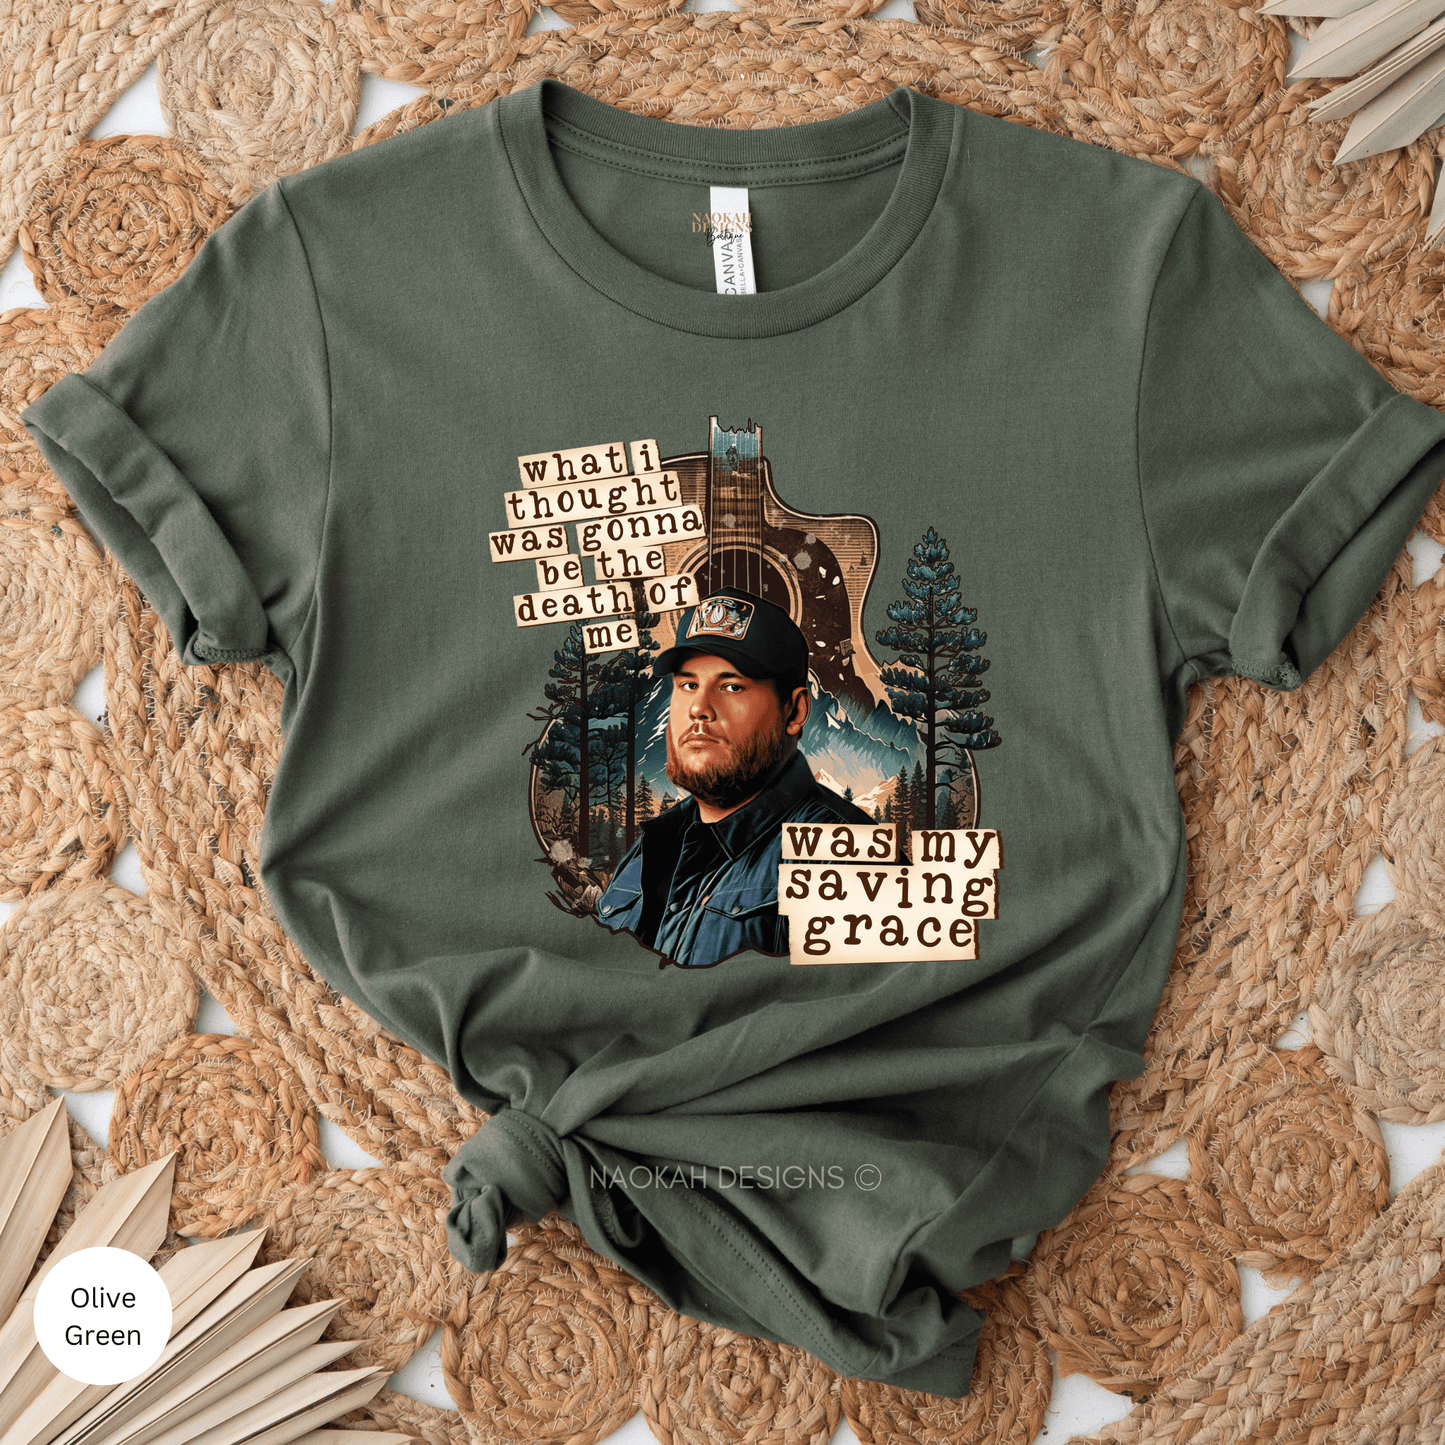 what i thought was gonna be the death of me was my saving grace shirt, cowgirl shirt, cowboy shirt, gift for country fan, combs shirt